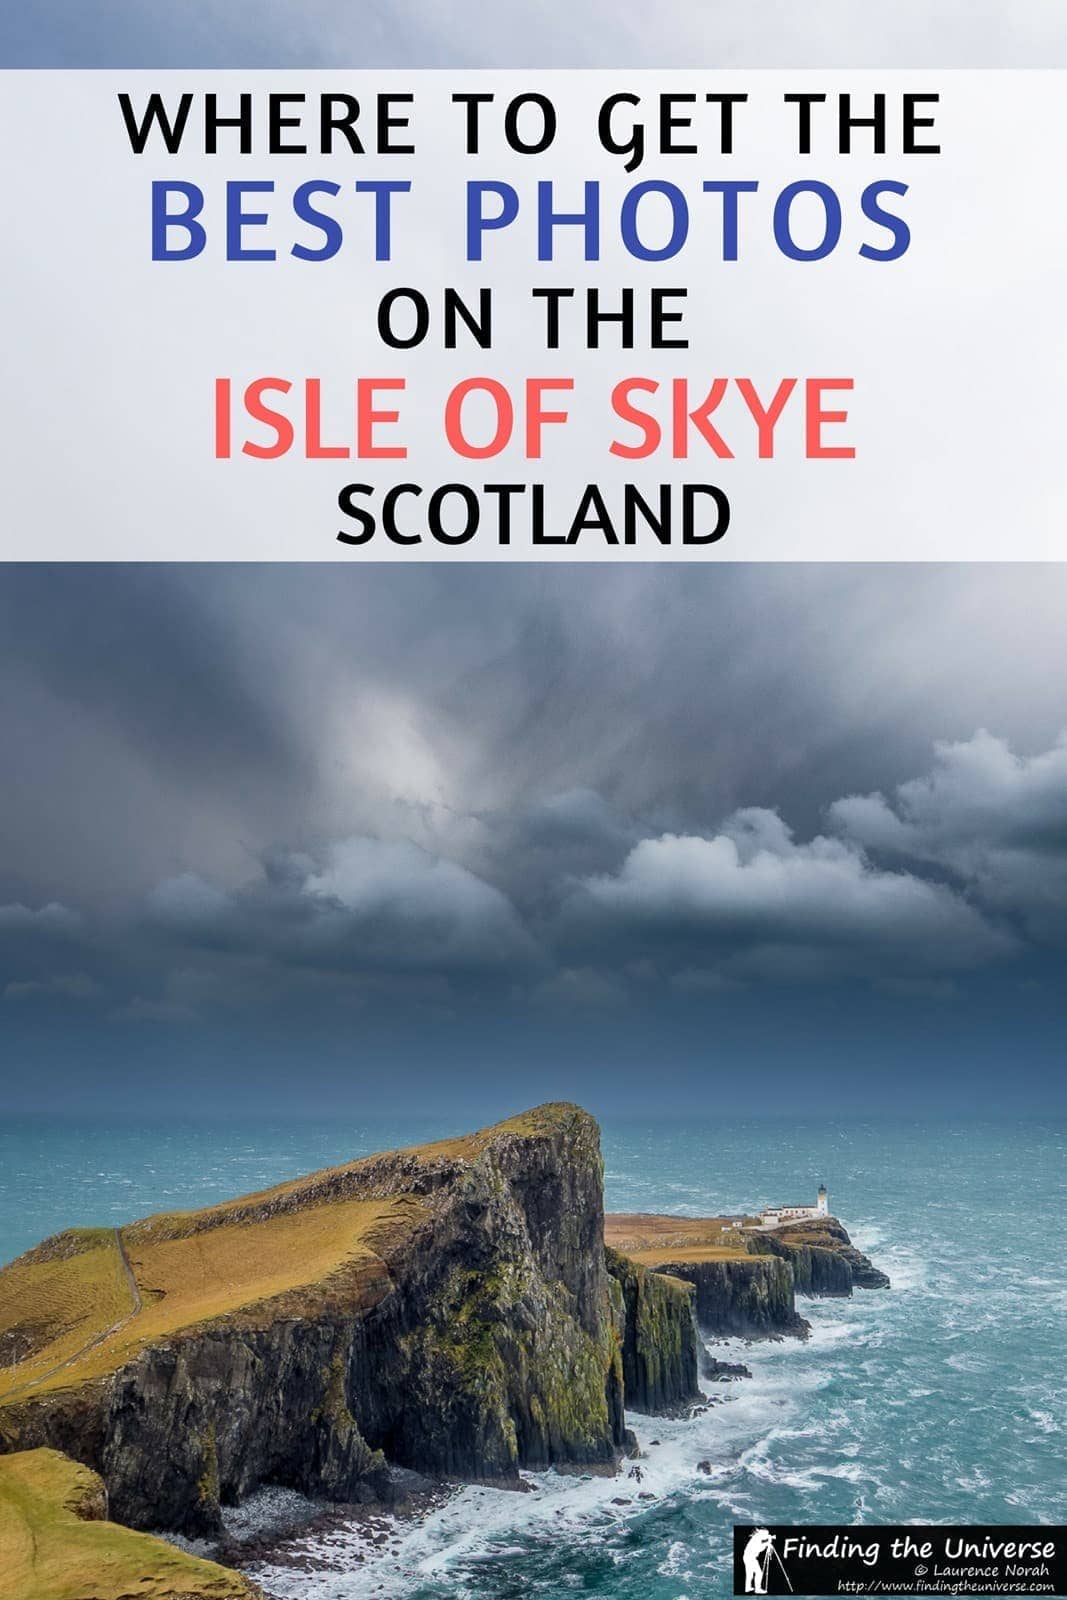 A guide to the best photography locations on the Isle of Skye, Scotland, with tips on gear for each location, exact locations and instructions for where to go to get the best shot! #travel #photography #scotland